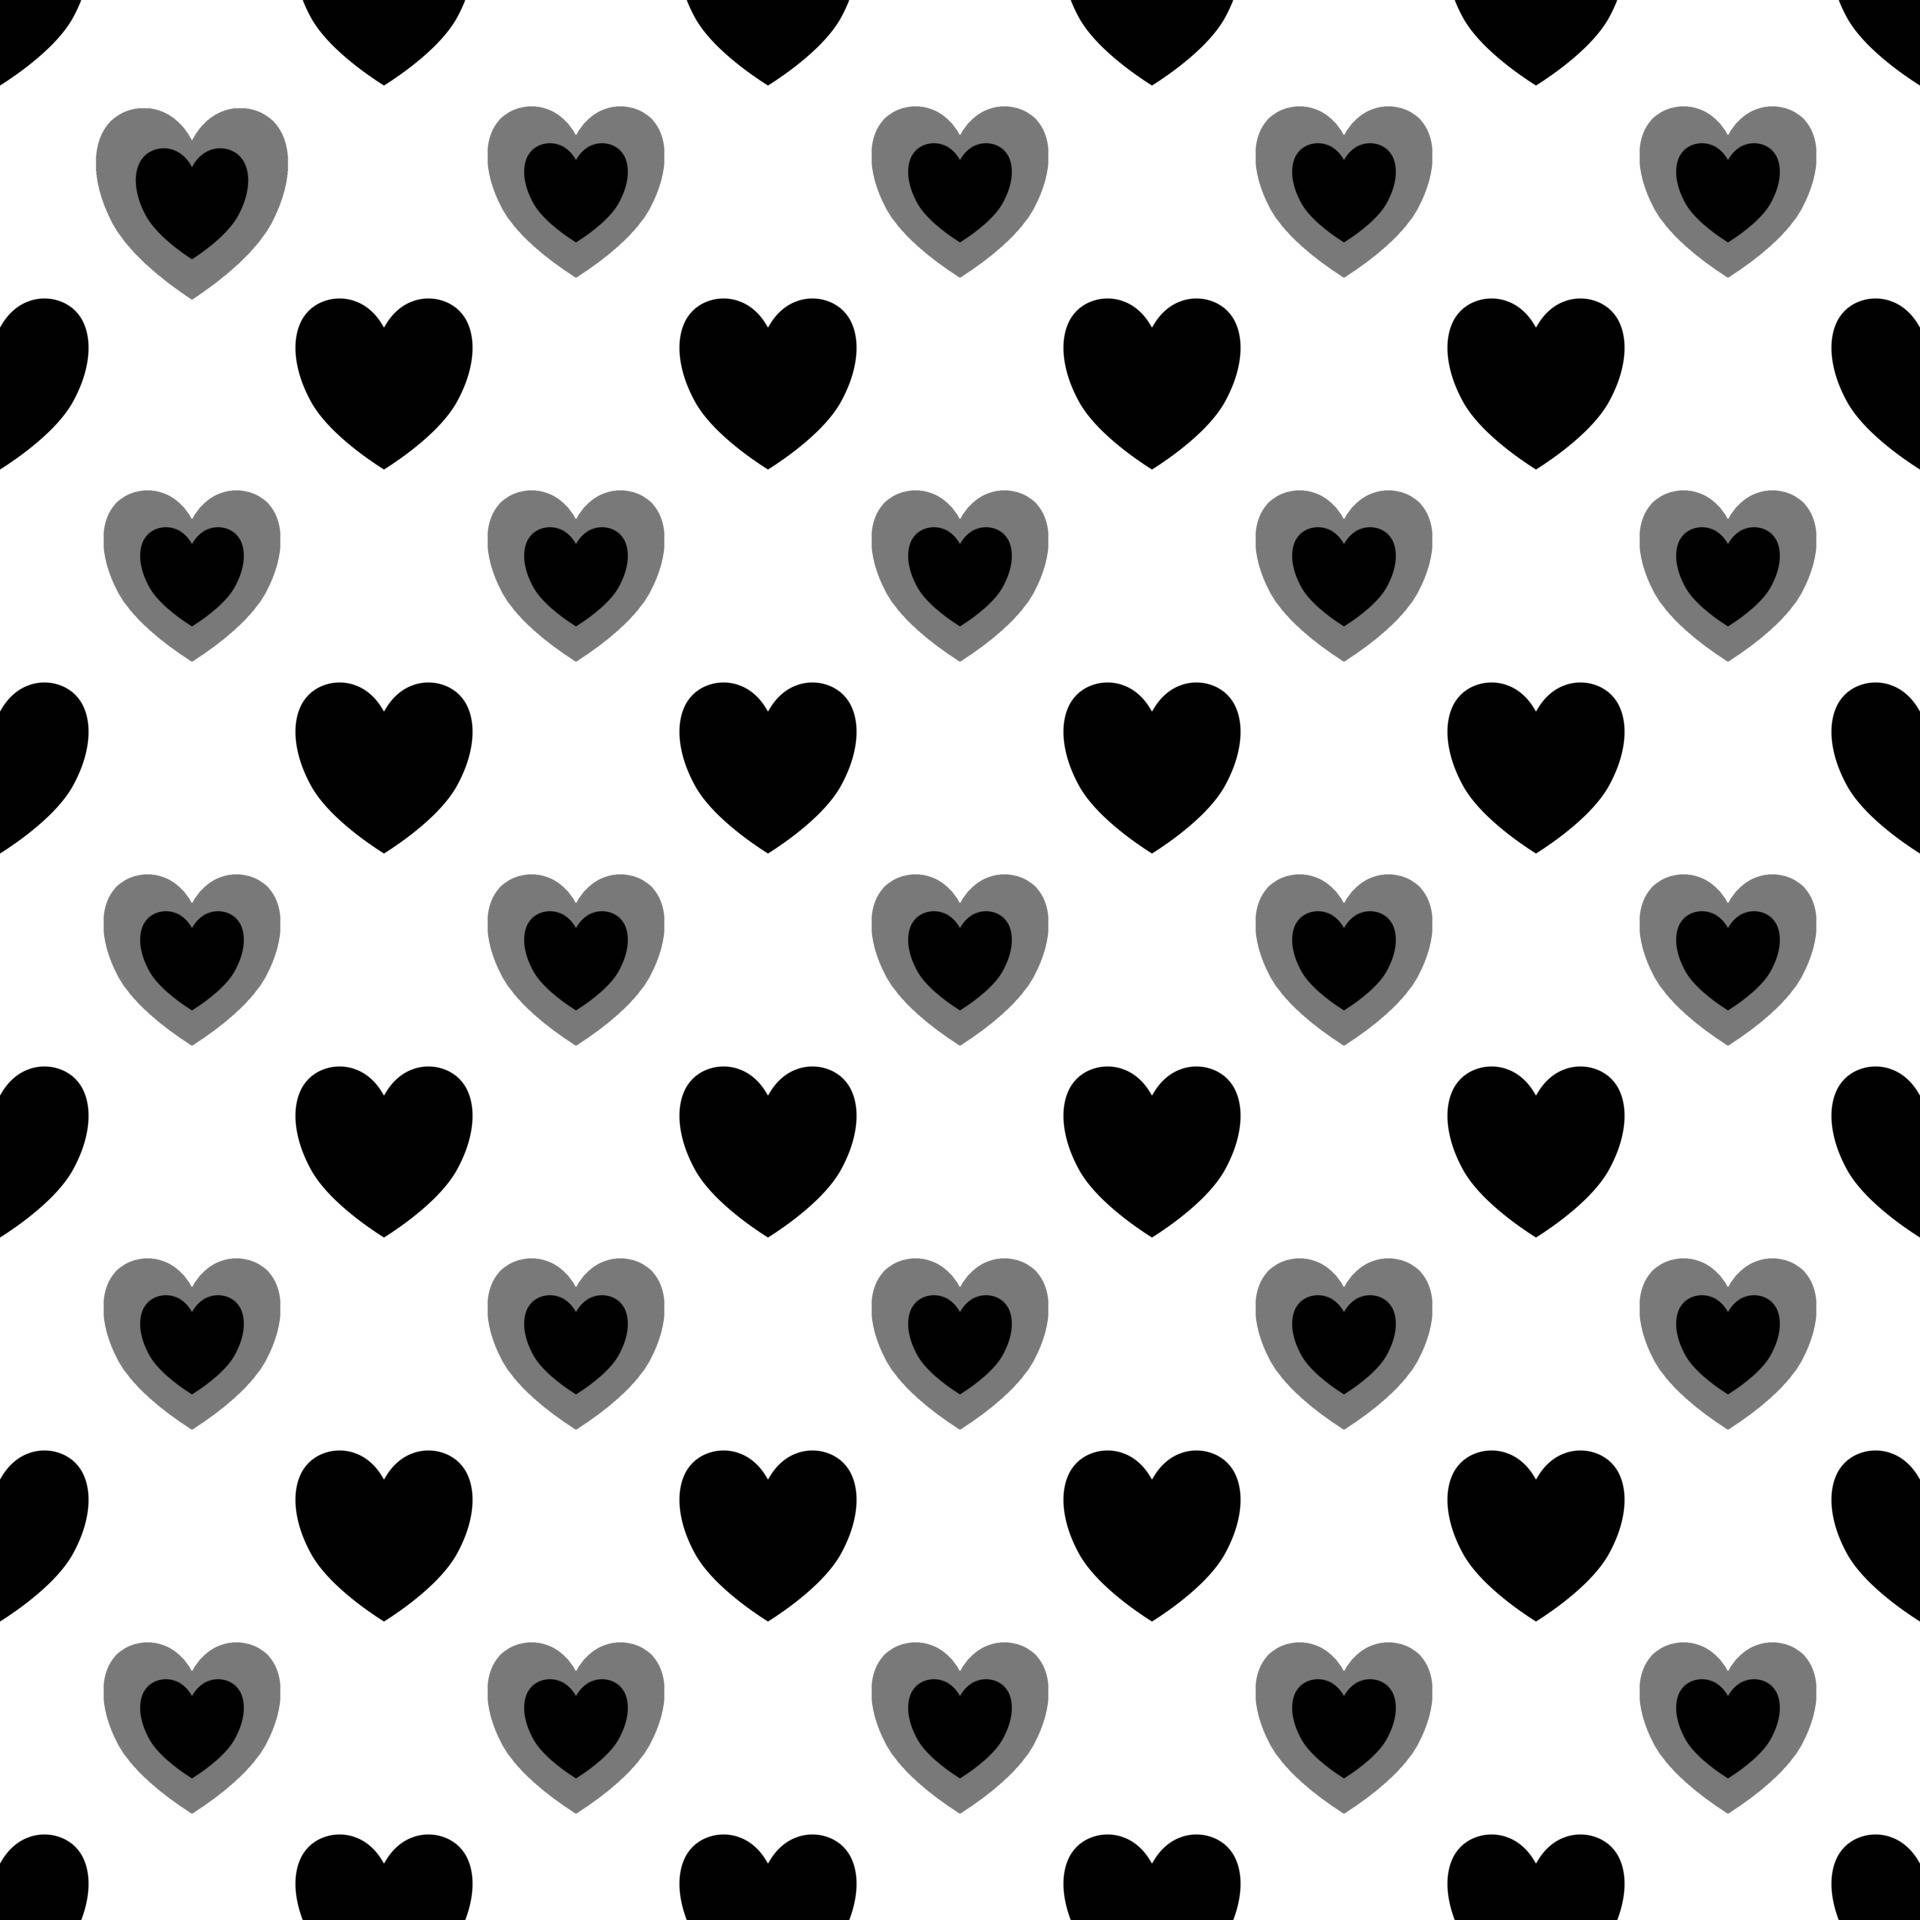 Black And White Hearts On A White Background Wallpaper